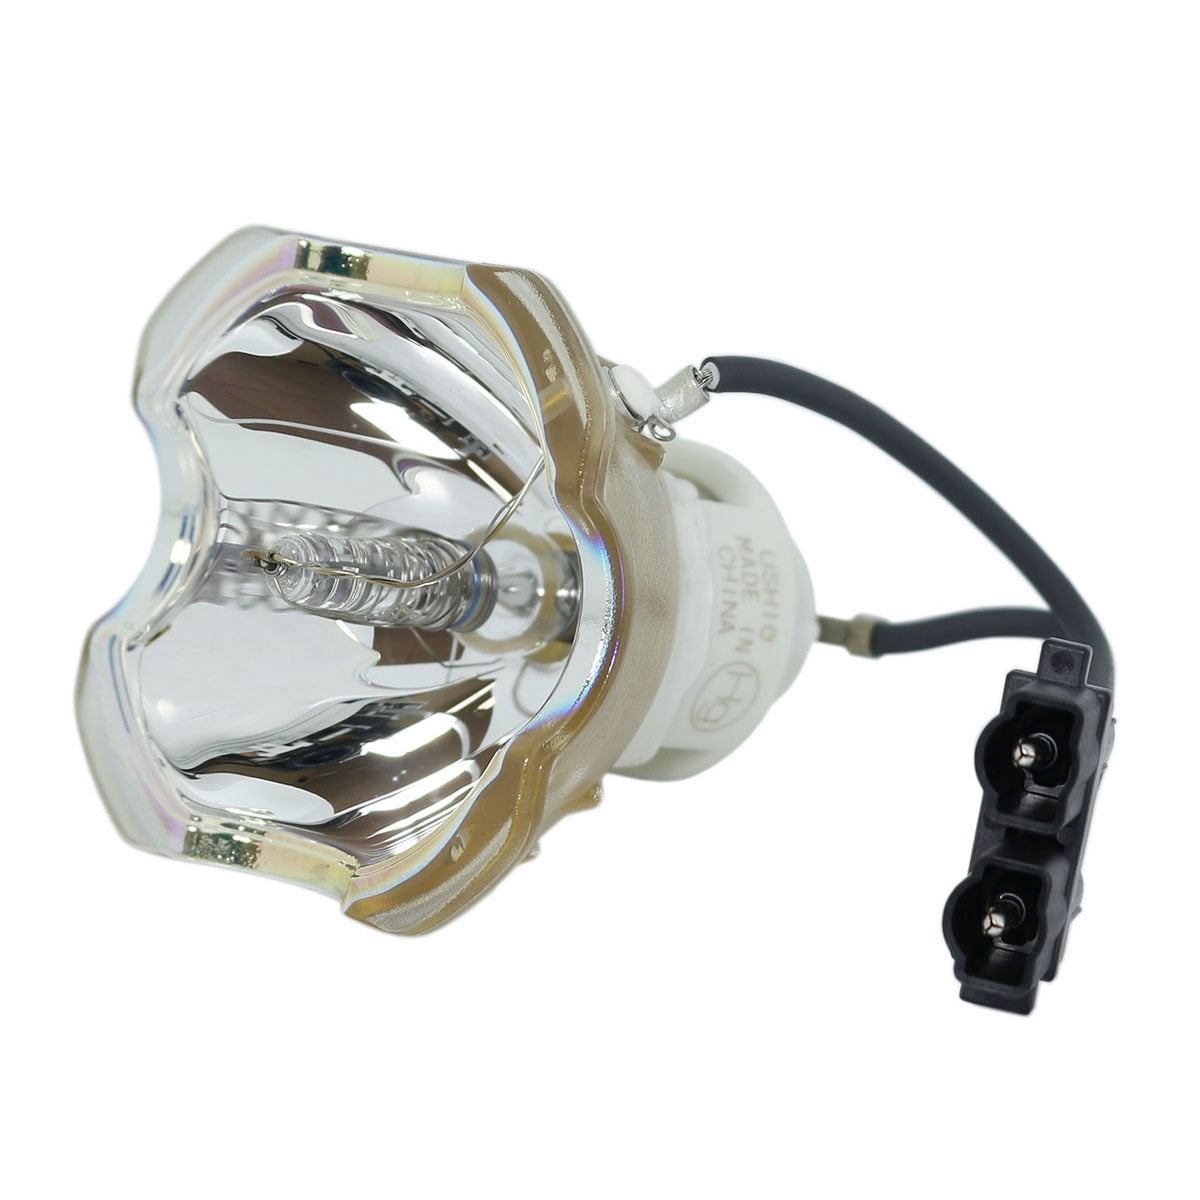 Original Ushio Projector Lamp Replacement for Ushio NSH285A Bulb Only 